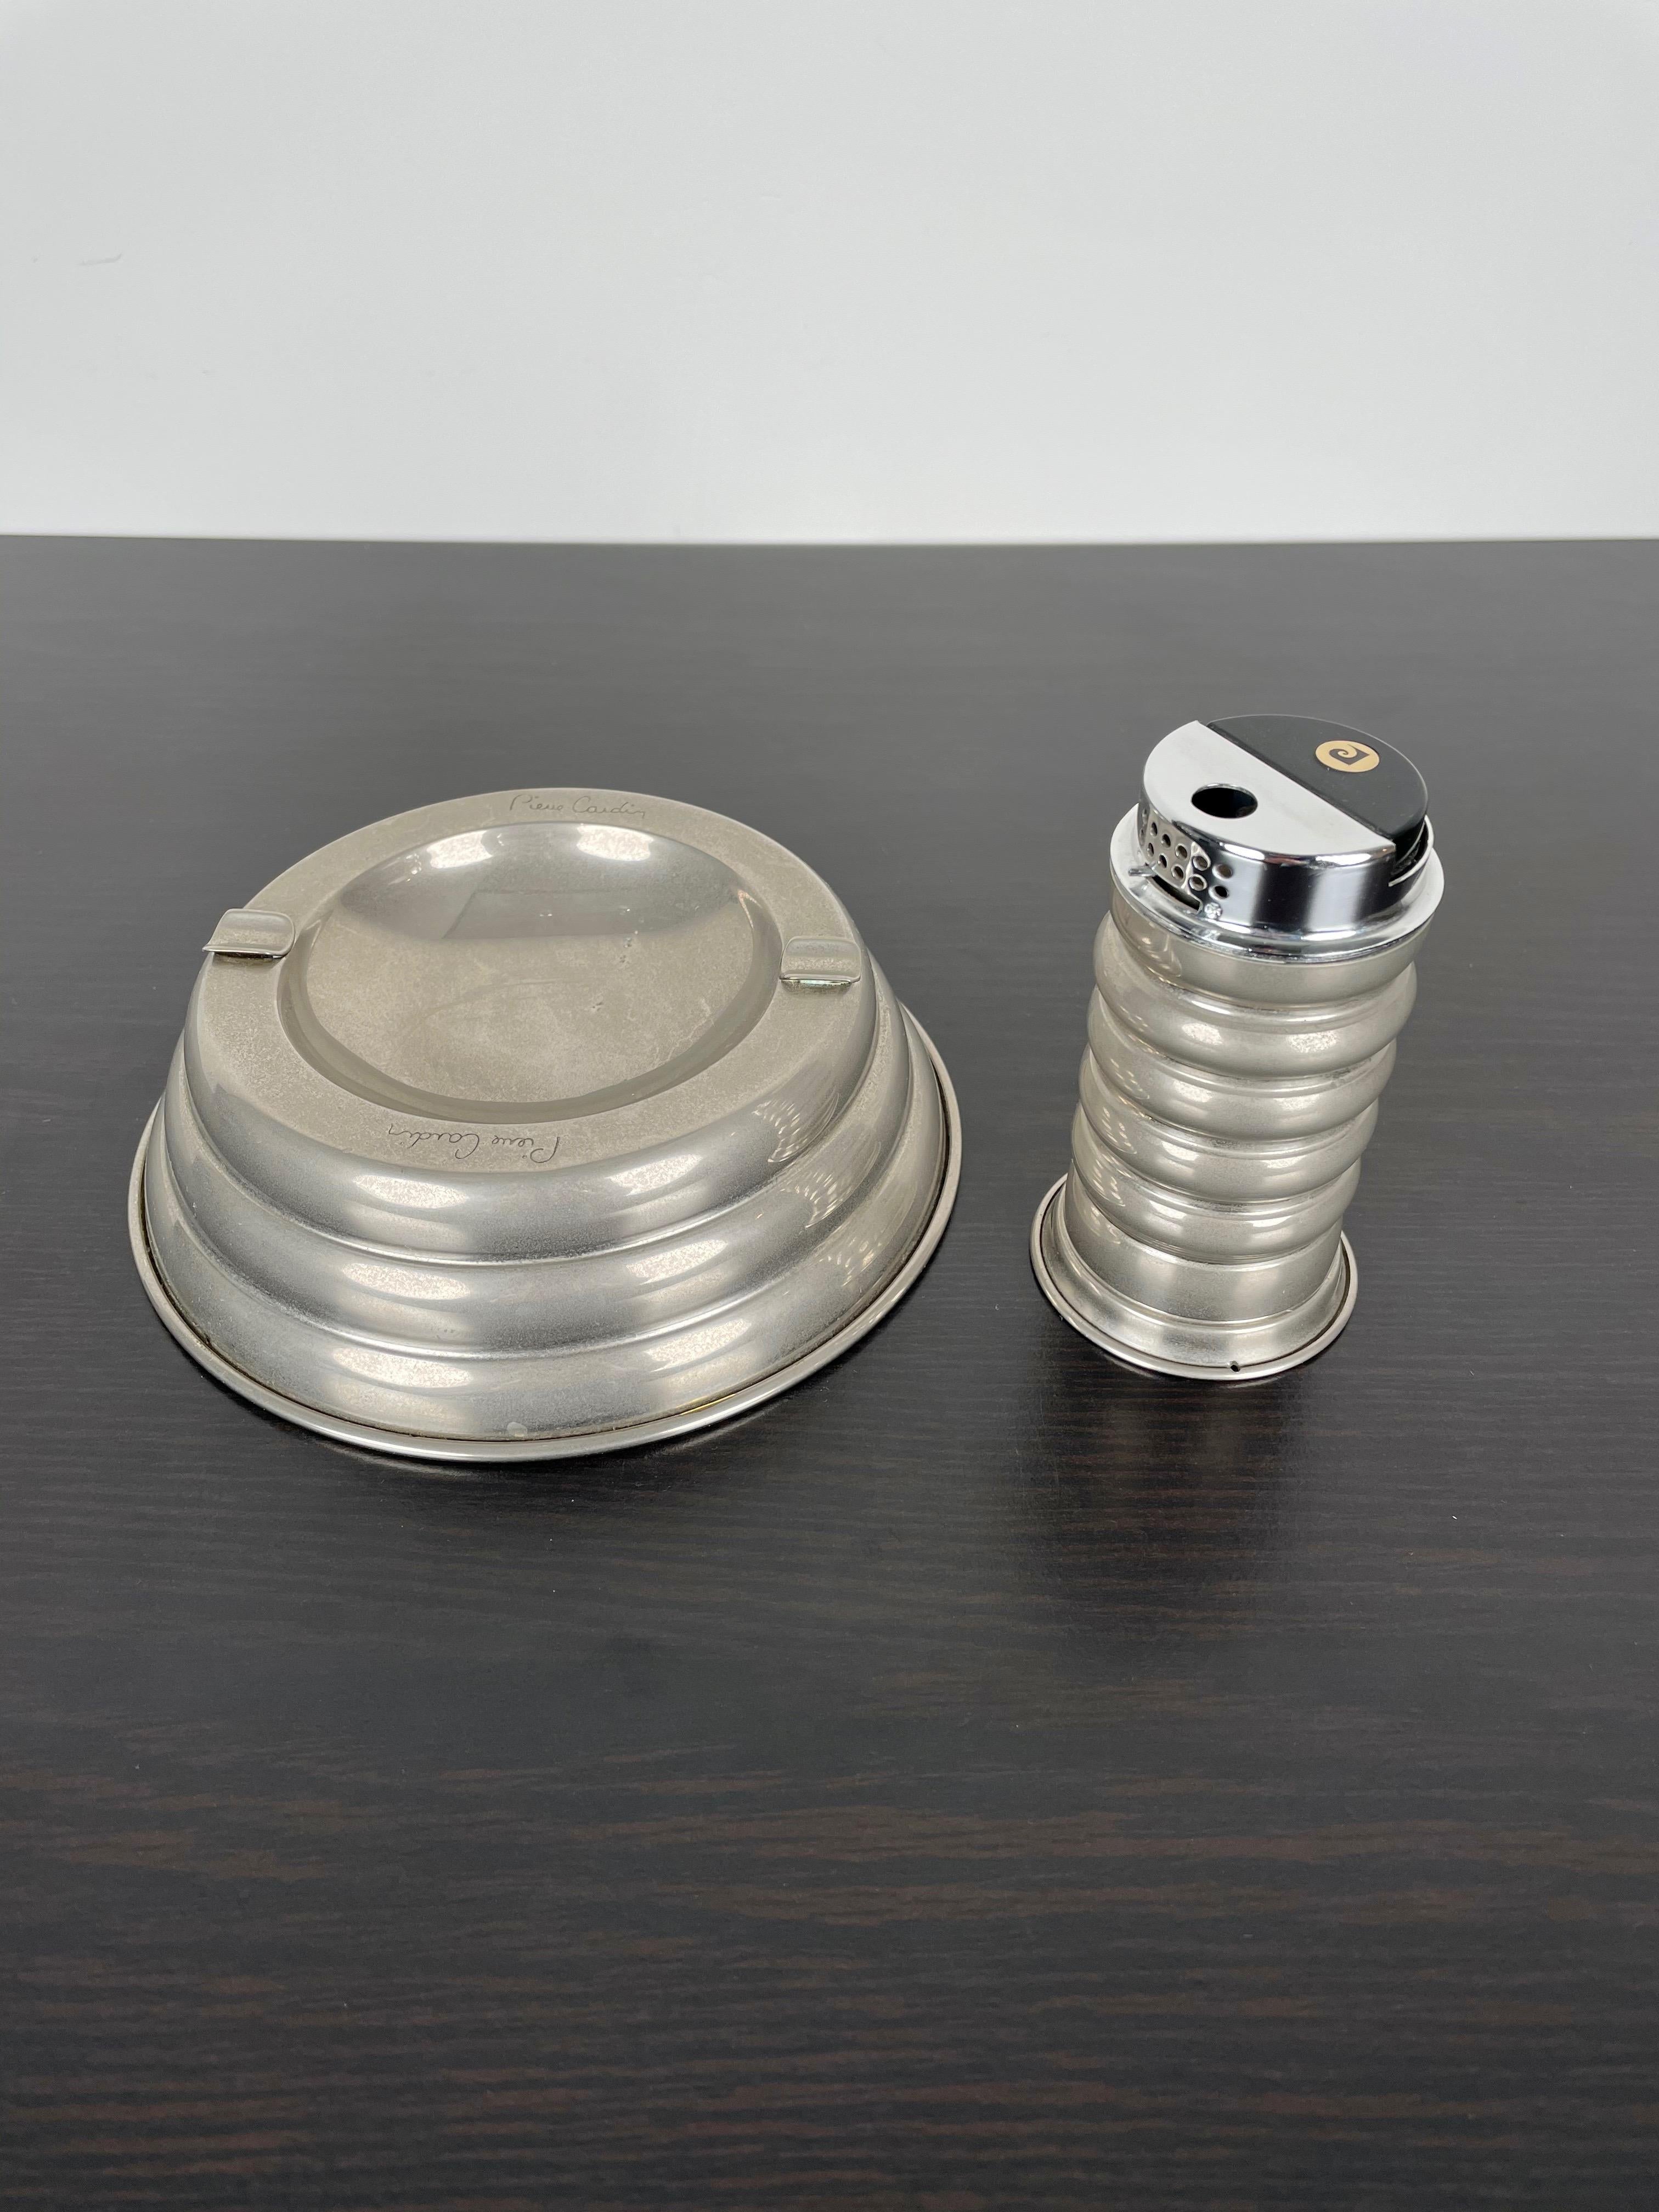 Tobacco table set in metal composed of a lighter and an ashtray made by the French designer Pierre Cardin, Paris, 1970s. 
On both items the designer's signature is engraved and visible, as shown in photos. 

Dimensions:
- Ashtray: Diameter 15 cm